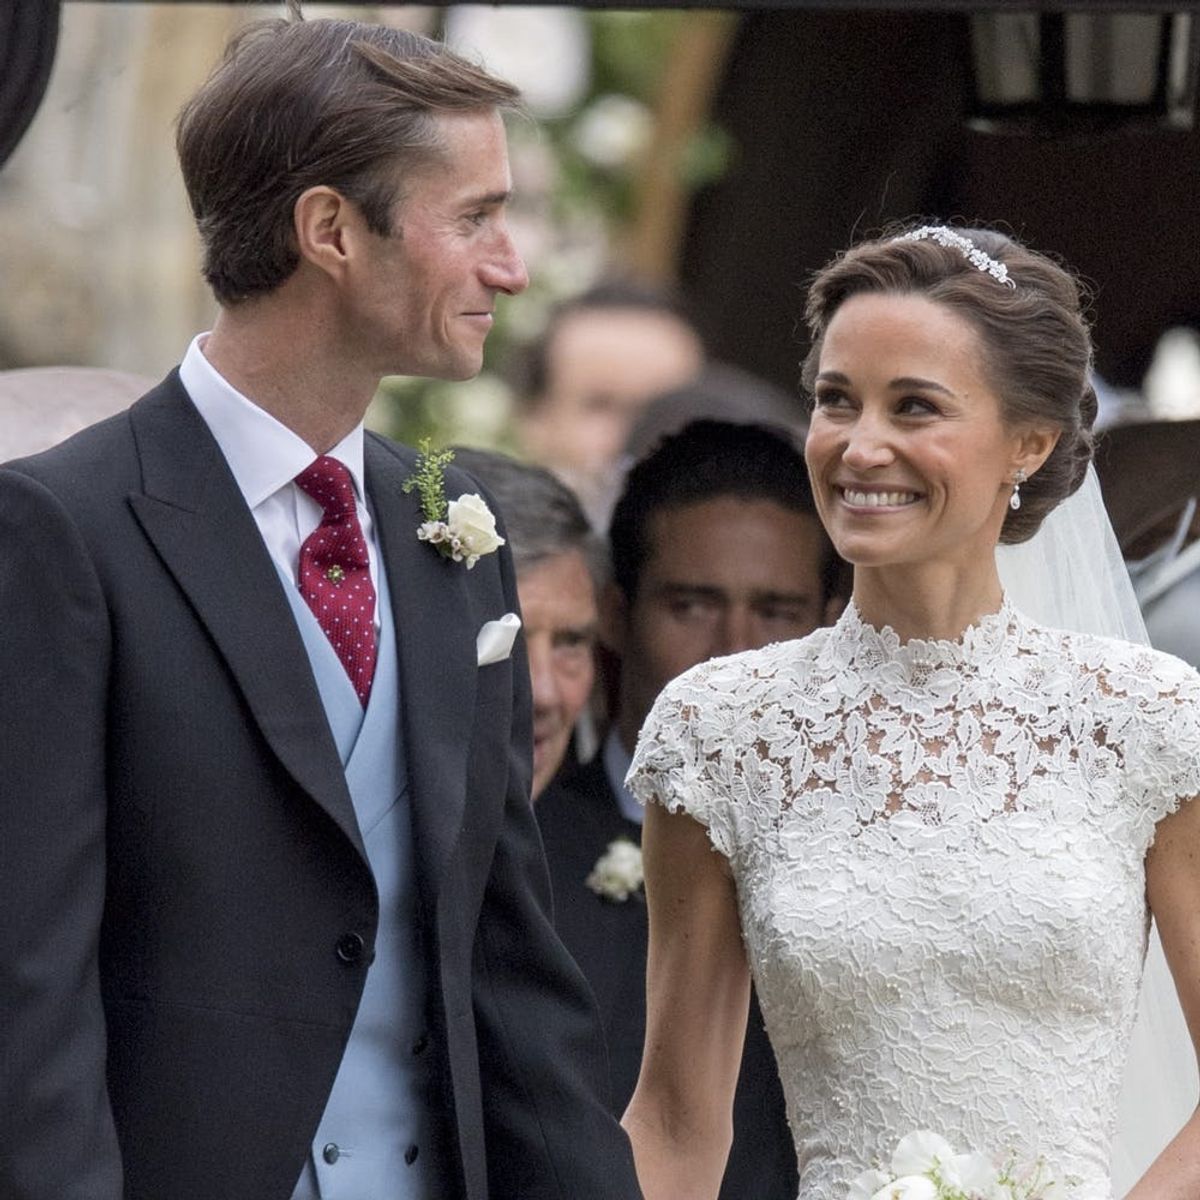 You Won’t Believe How Much Pippa Middleton’s Wedding Cake Cost